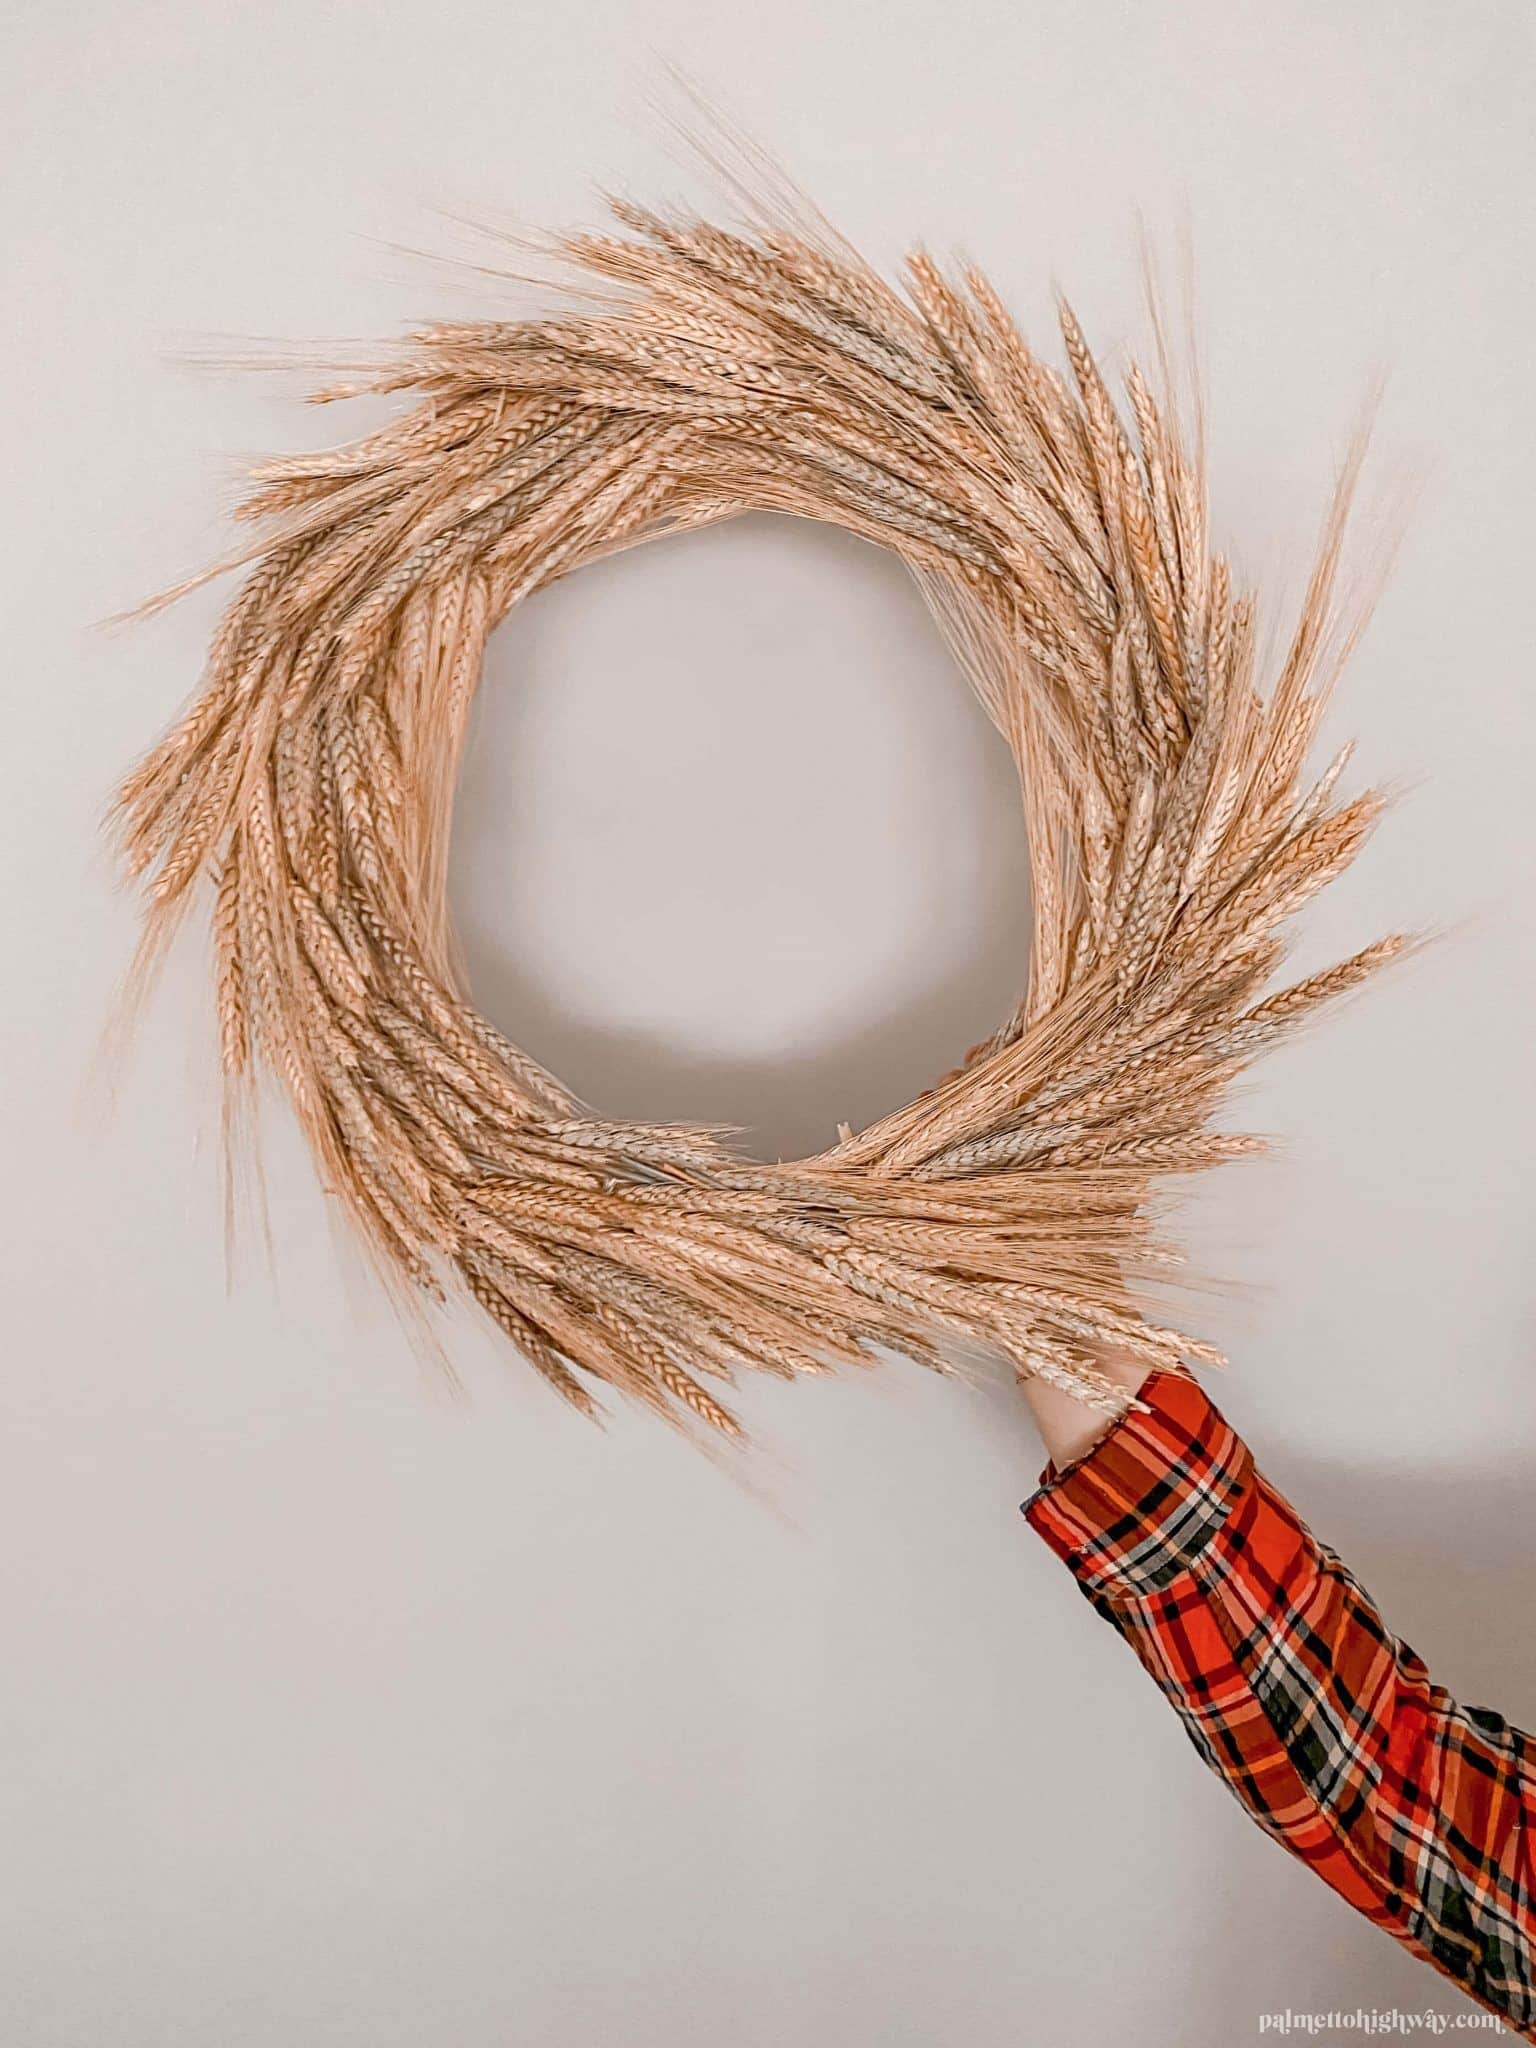 A hand holds a fall wreath created from wheat against a wall.